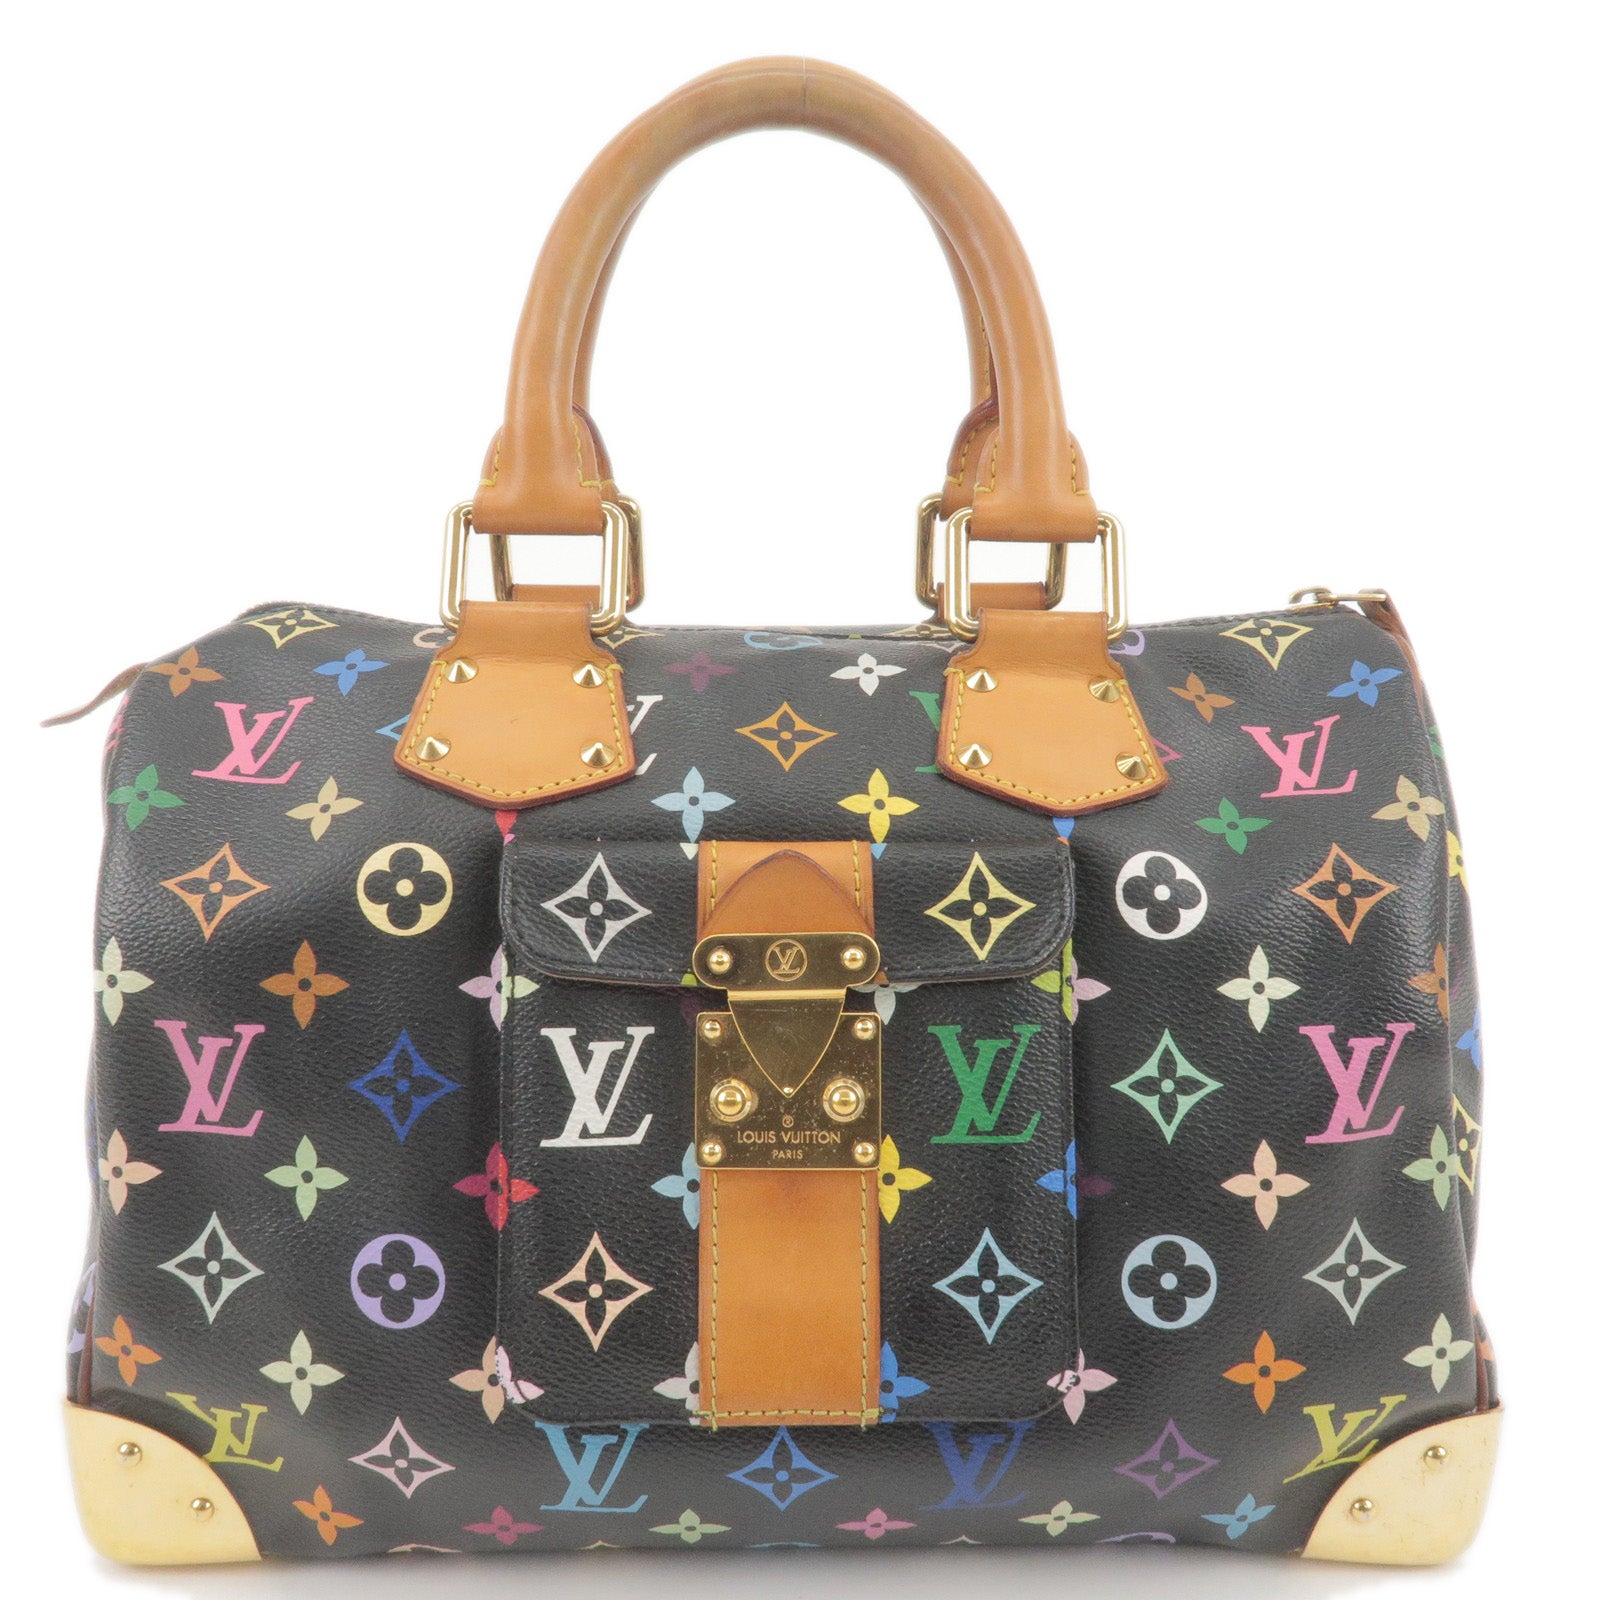 louis vuitton black bag with colored letters